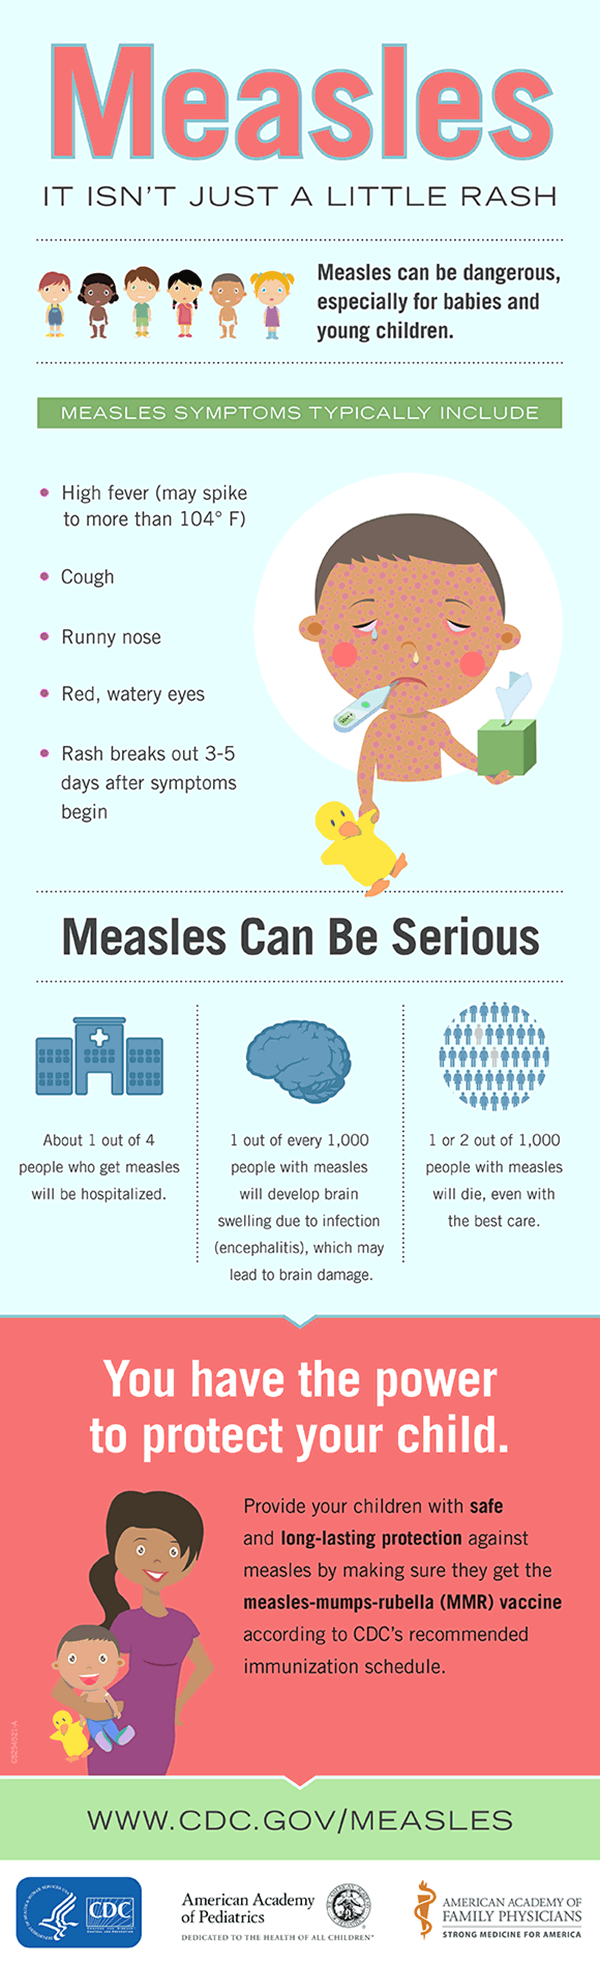 CDC measles-infographic describing how serious it is and that it's not just a little rash